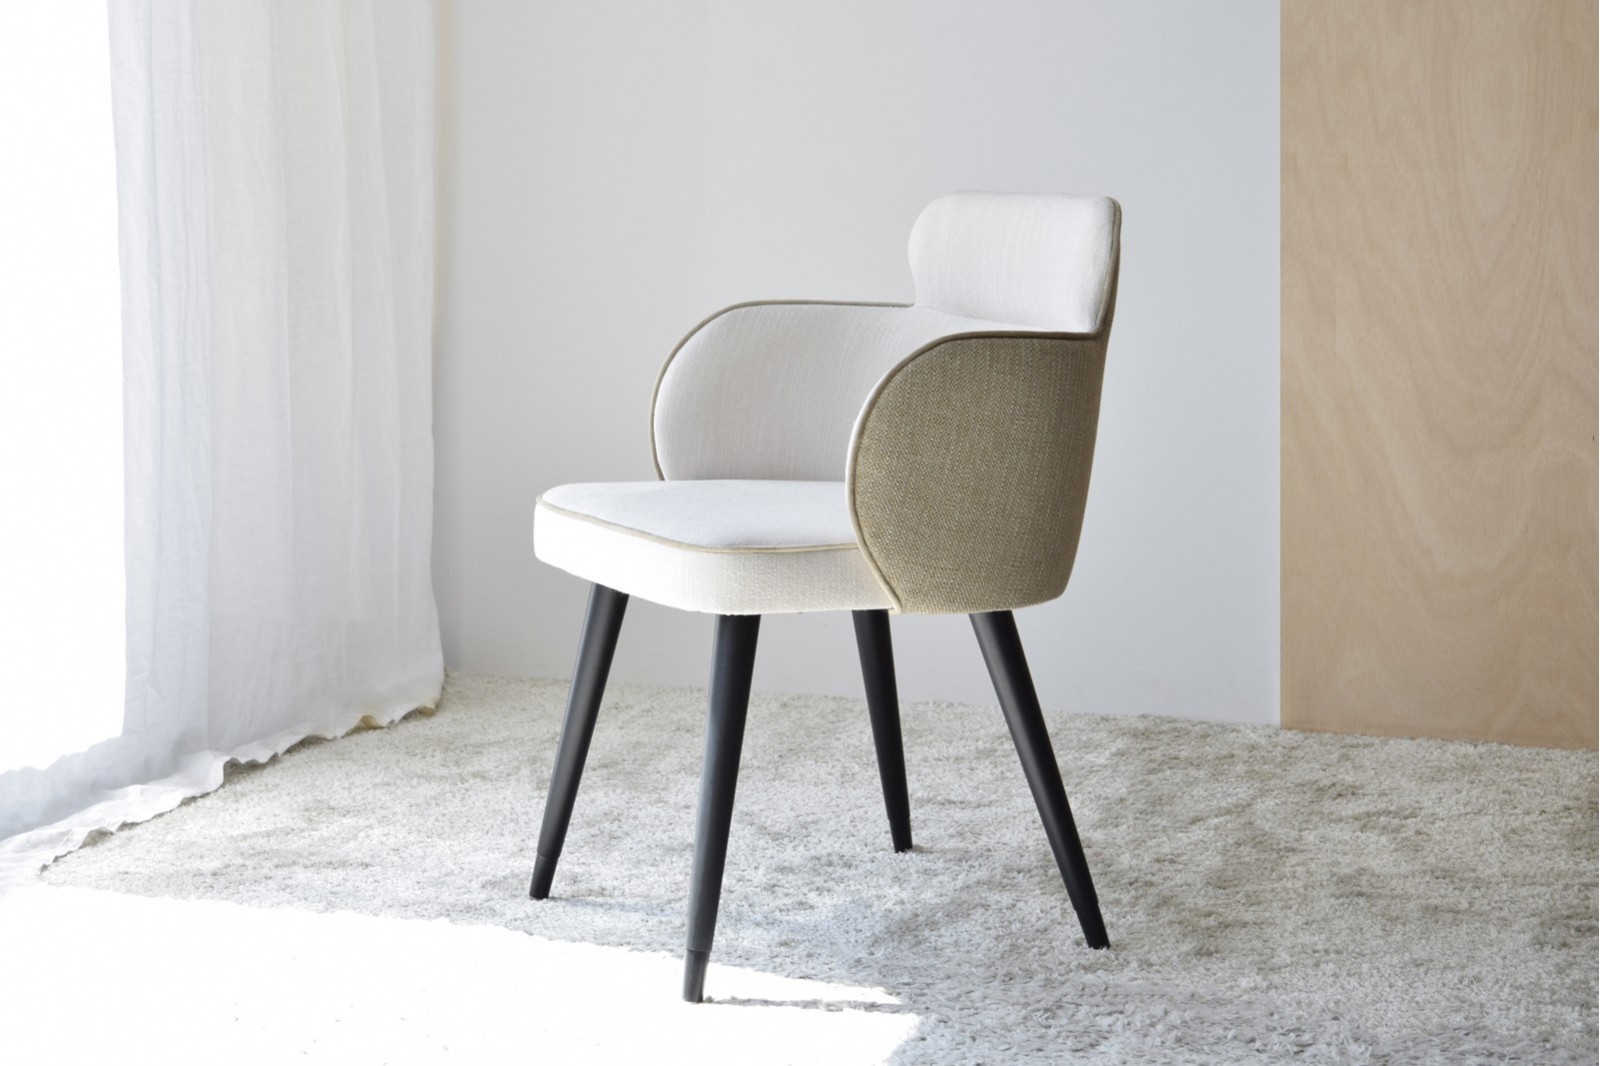 SET 2 DINING CHAIRS OSLO.BEIGE NATURAL